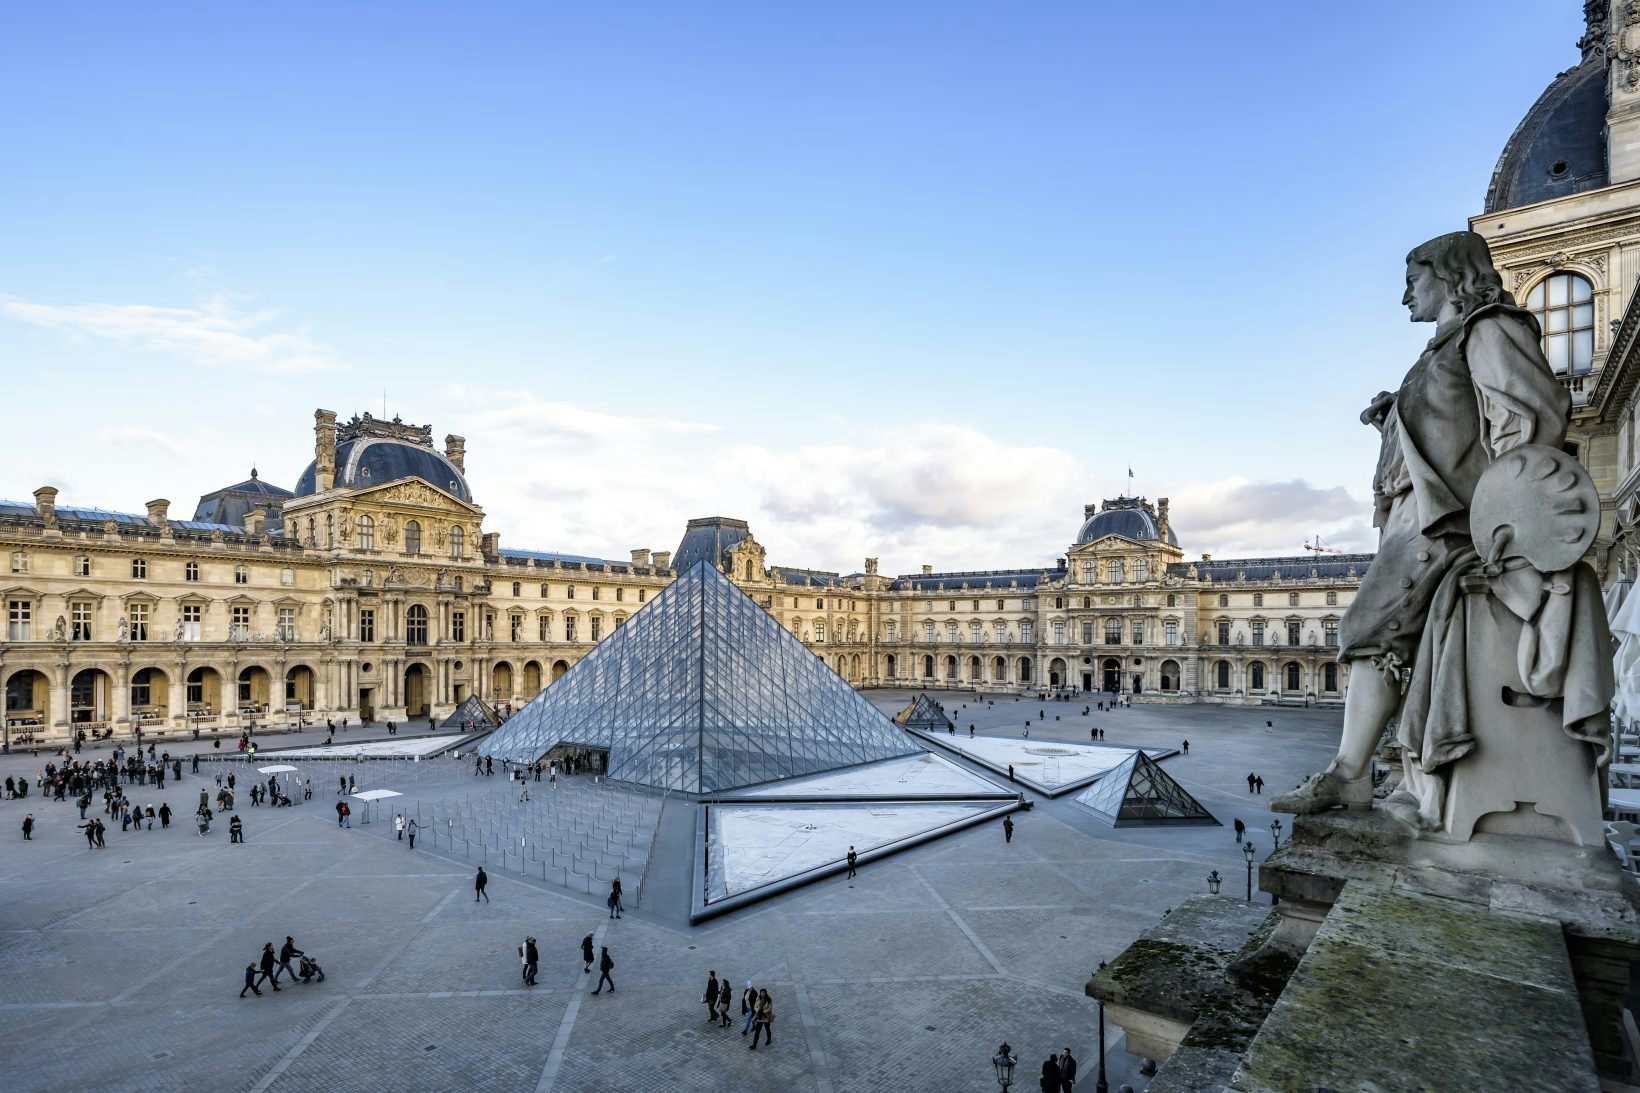 The latest luxury? A treat from the Louvre